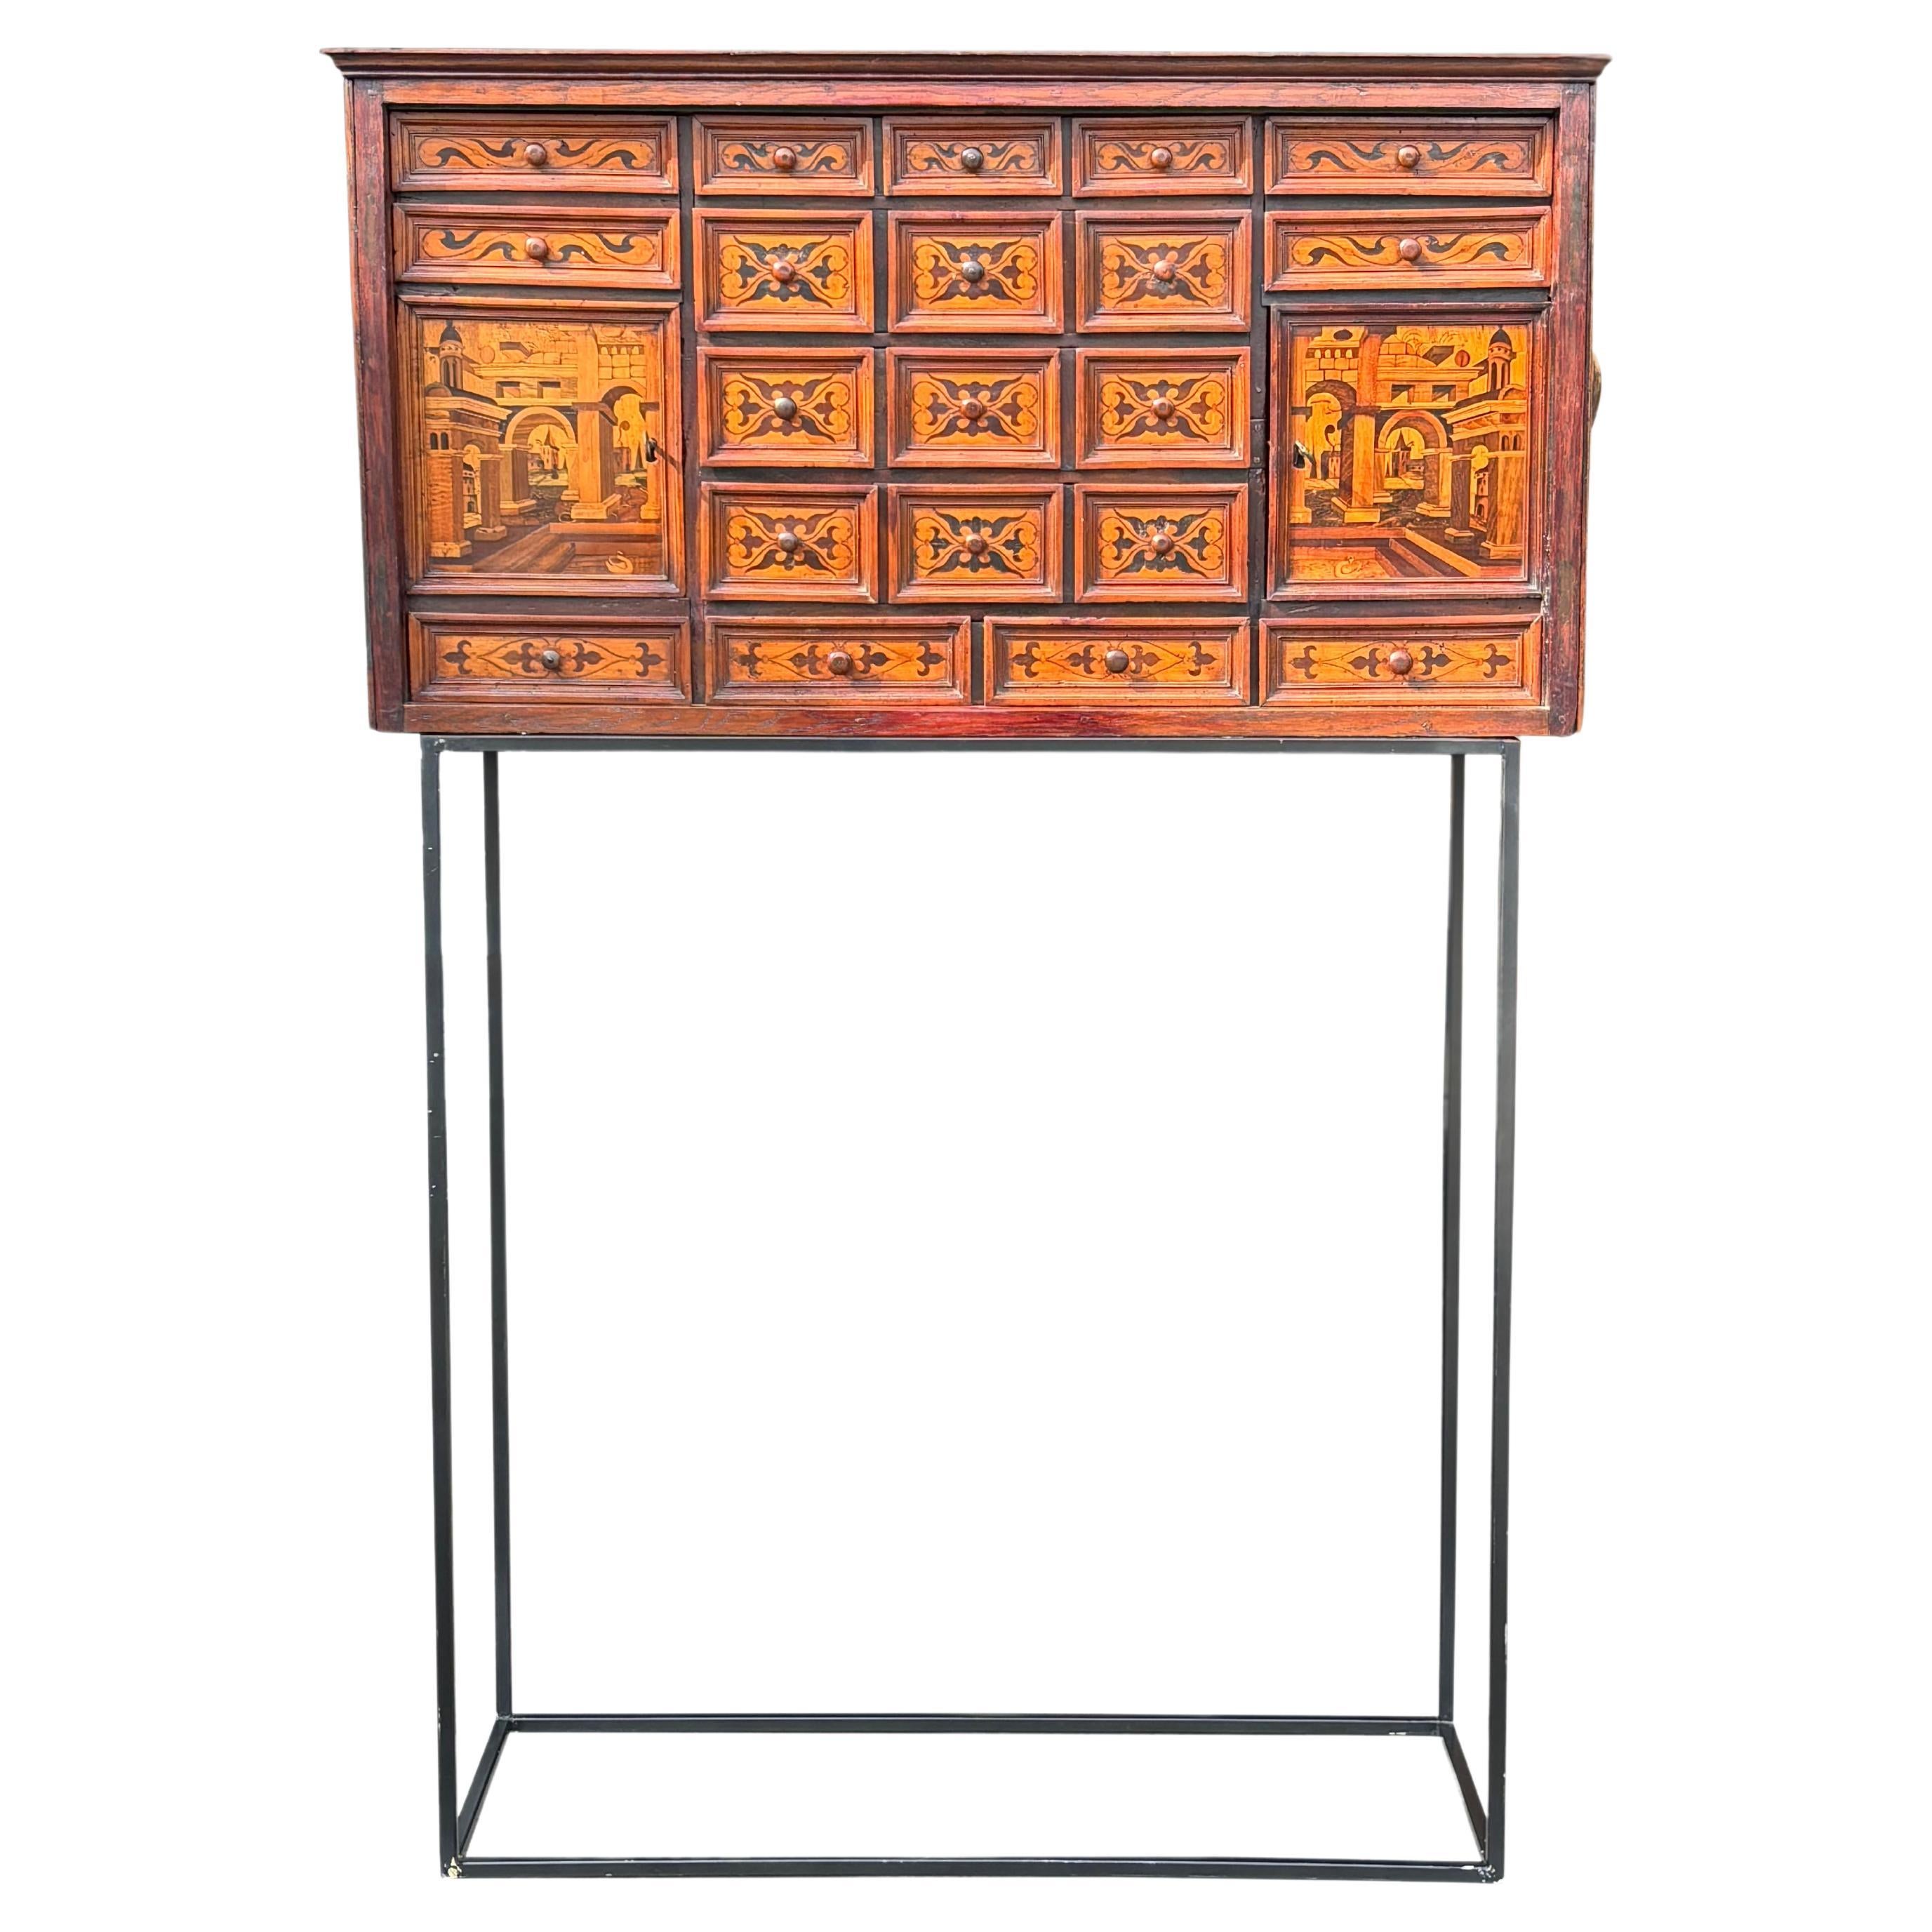 18th Century Italian Provincial Marquetry Cabinet on Stand